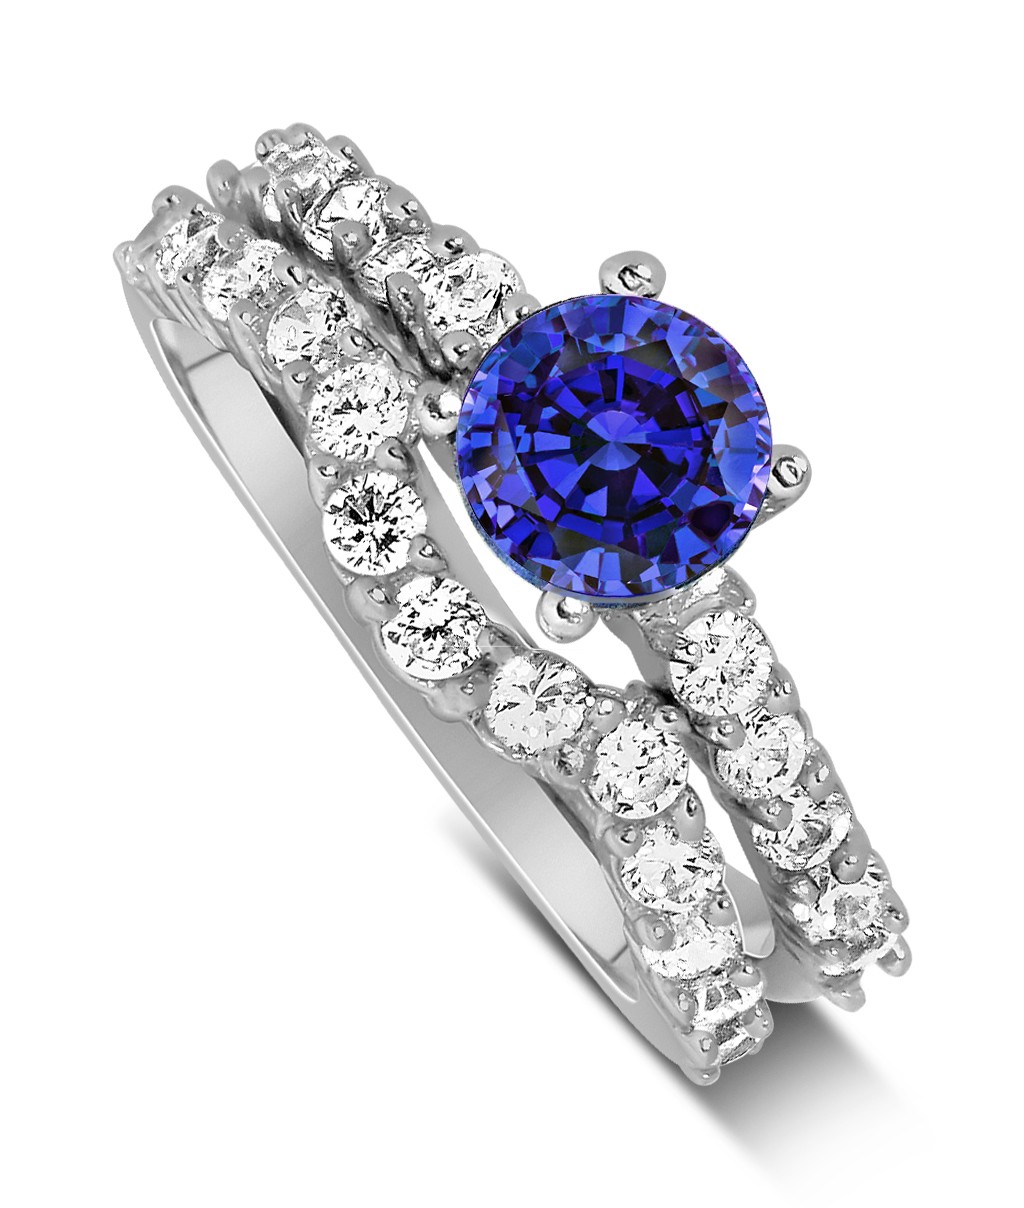 2 Carat Vintage Round cut Blue Sapphire and Diamond Wedding Ring Set in White Gold JeenJewels